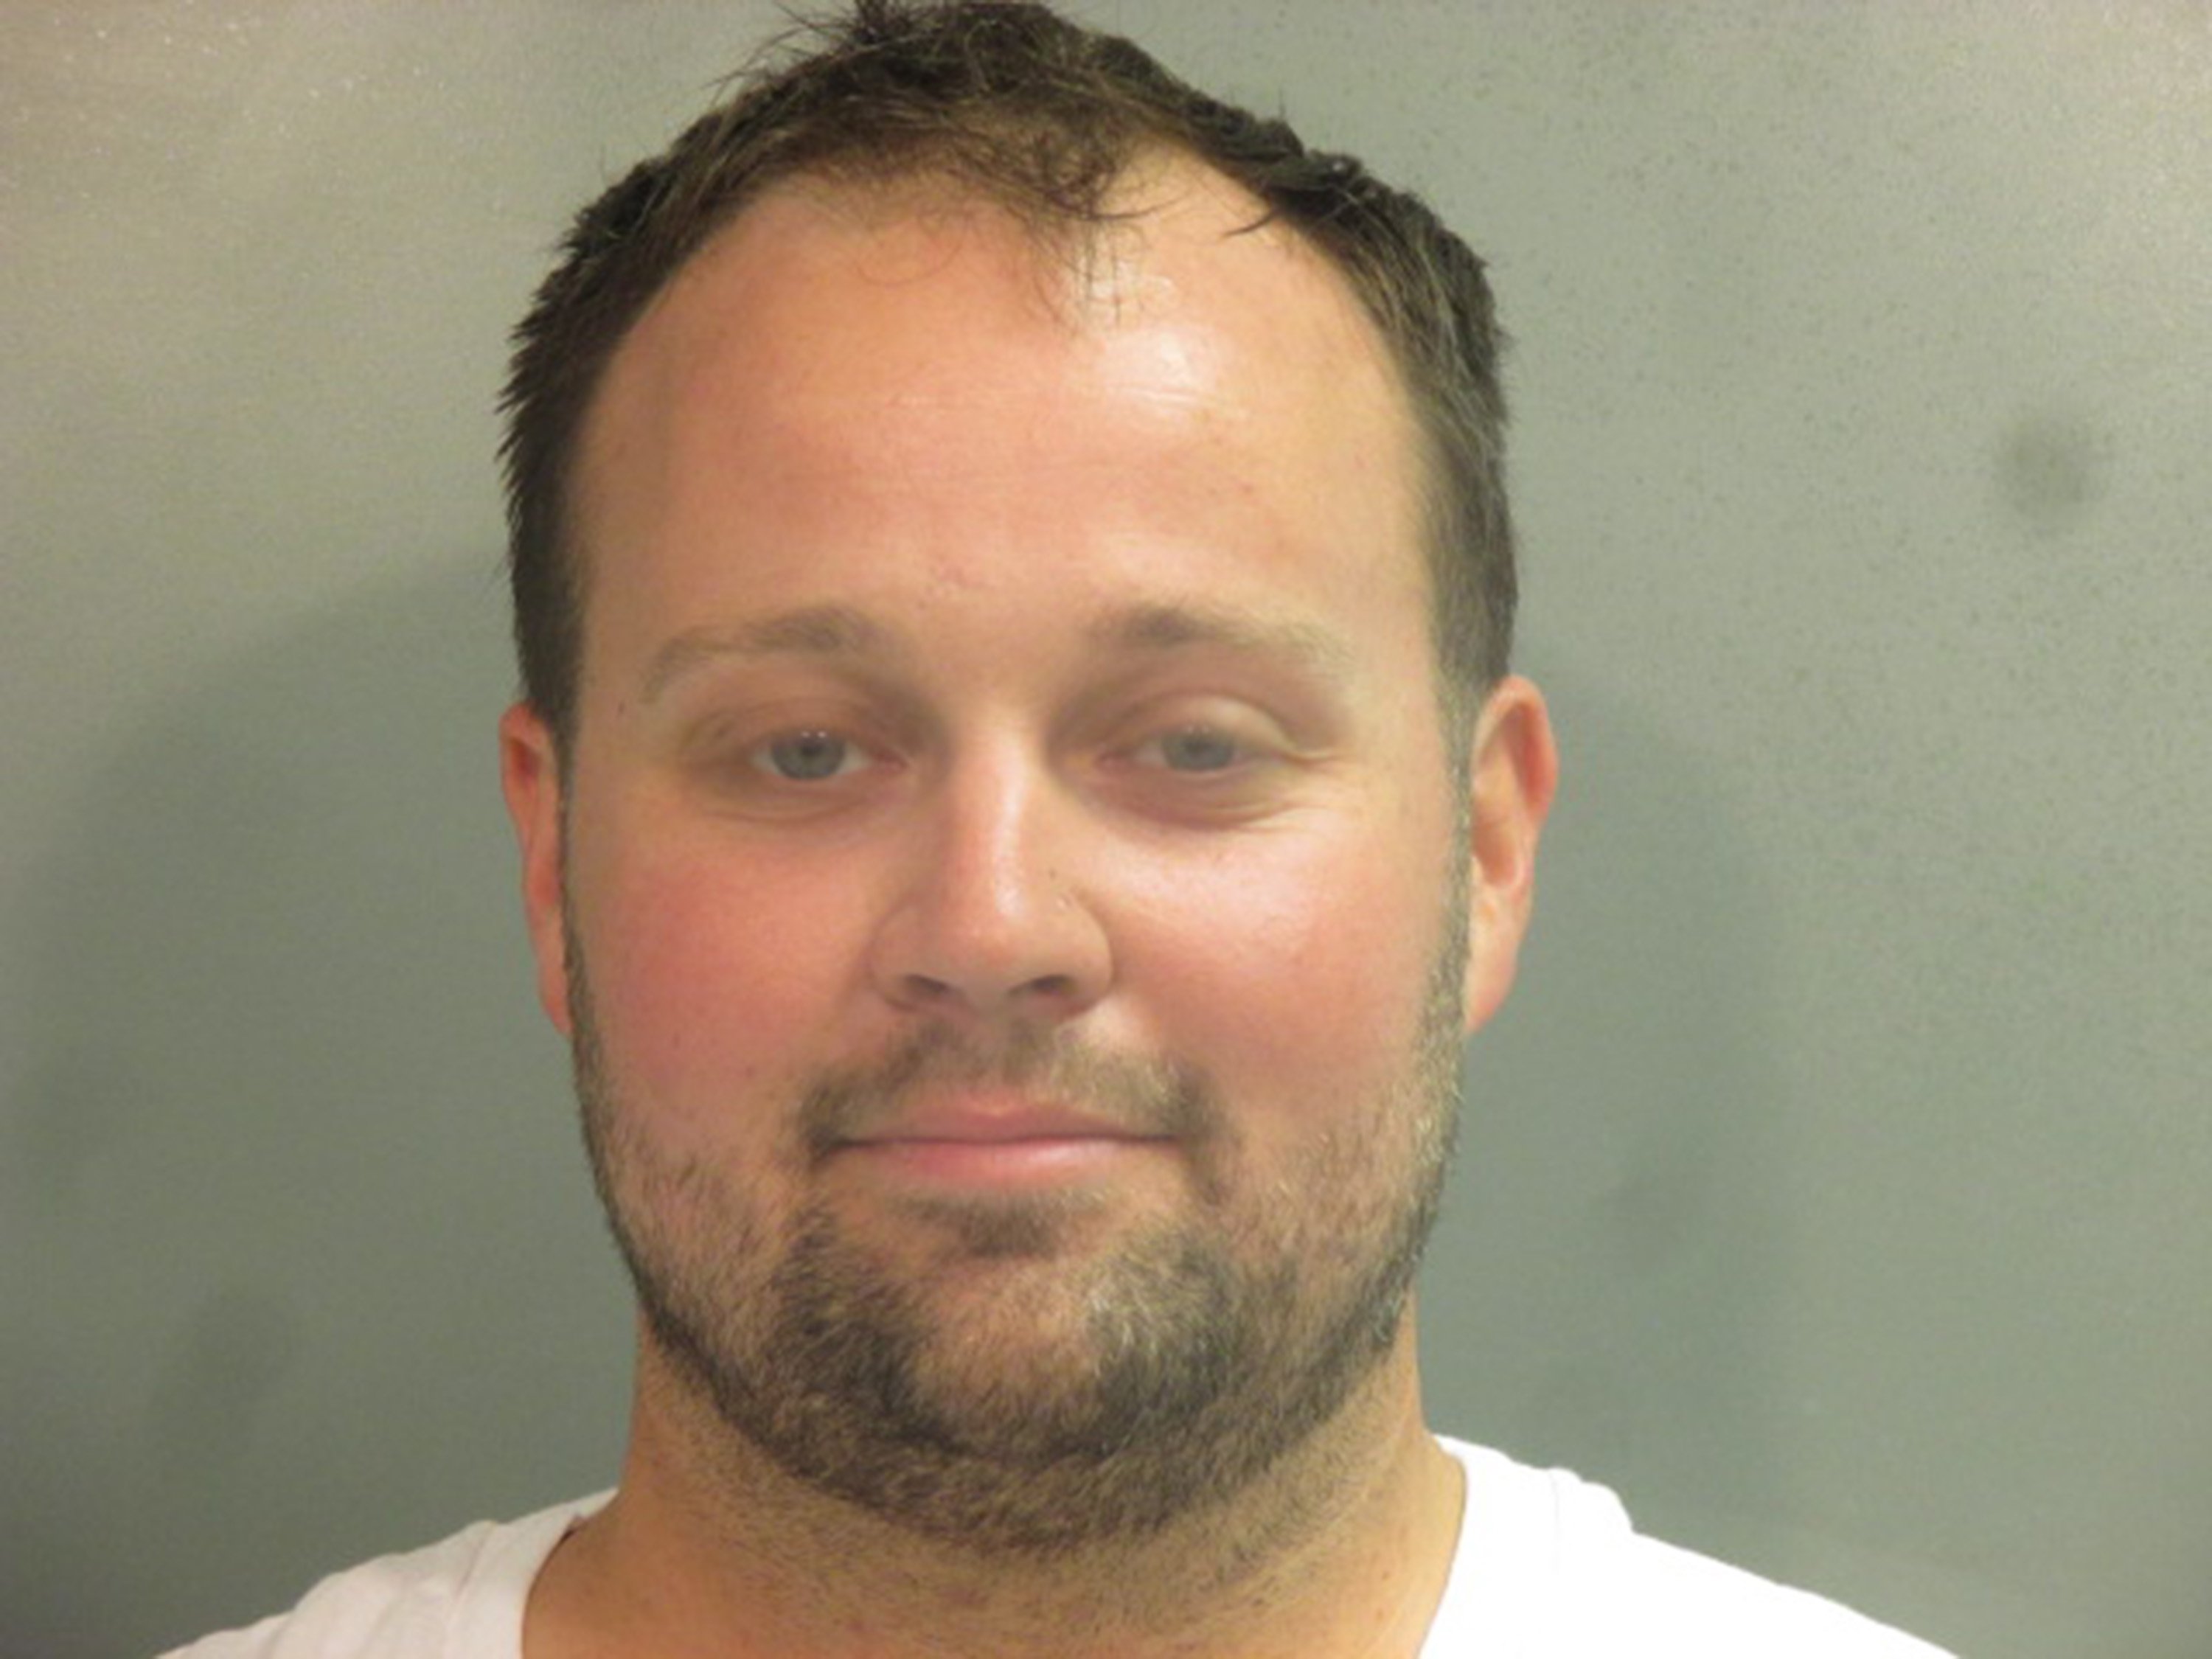 In this handout photo provided by the Washington County Sheriff’s Office, former television personality on "19 Kids And Counting" Josh Duggar poses for a booking photo after his arrest April 29, 2021 in Fayetteville, Arkansas. Duggar was reportedly arrested by federal agents and is being detained on a federal hold.